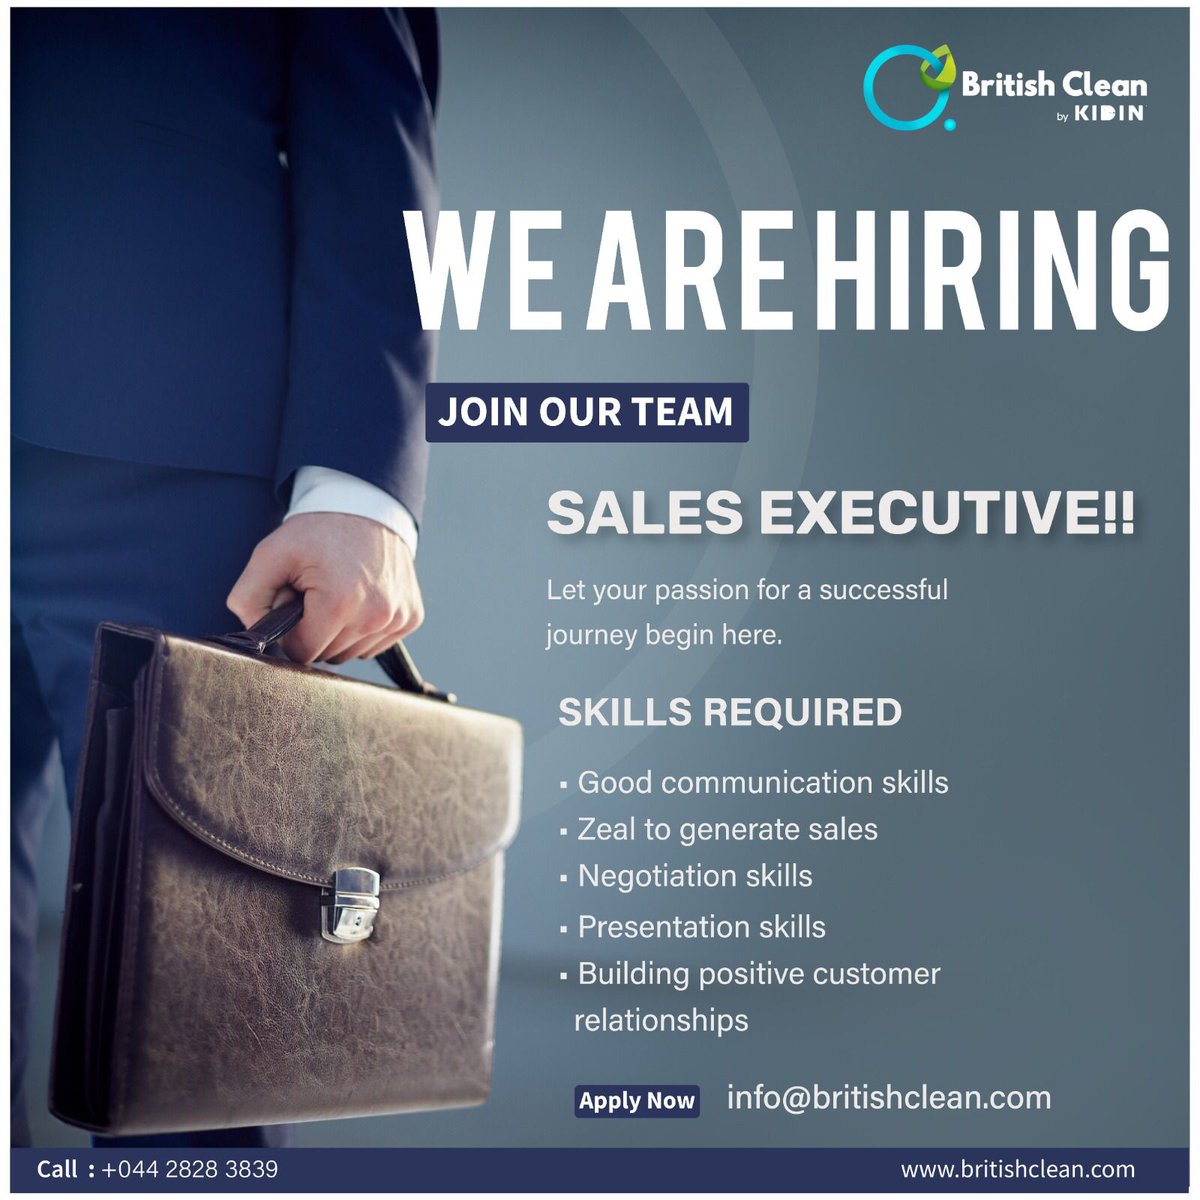 We Are Hiring! We are looking for an experienced Sales Executive to join our company.
.
.
.
#britishclean #handwash #cleaning #clean #cleaningservice #home #cleaningmotivation #cleaningservices #wow #spirits #aroma #happyday #floorcleaner #dw9 #dishwash #dishwashliquid